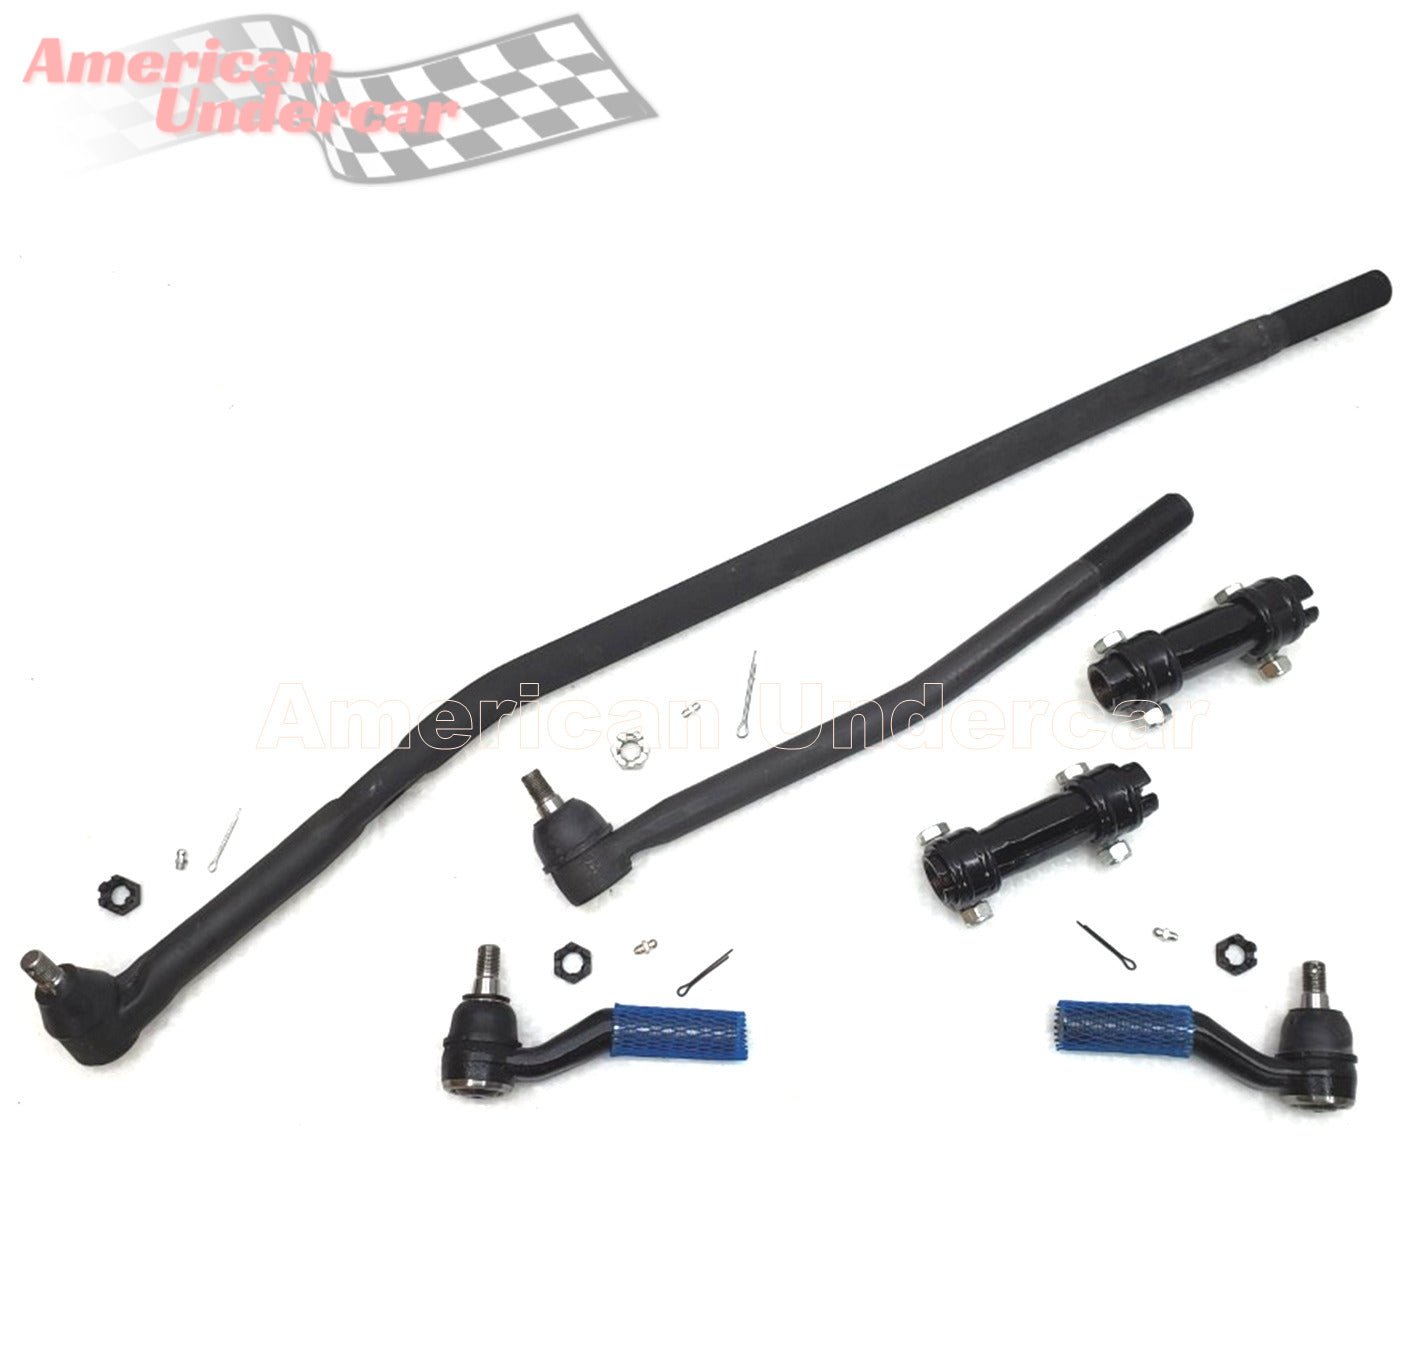 HD Drag Link Tie Rod Sleeve Steering Suspension Kit for 2008-2019 Ford E450 SRW